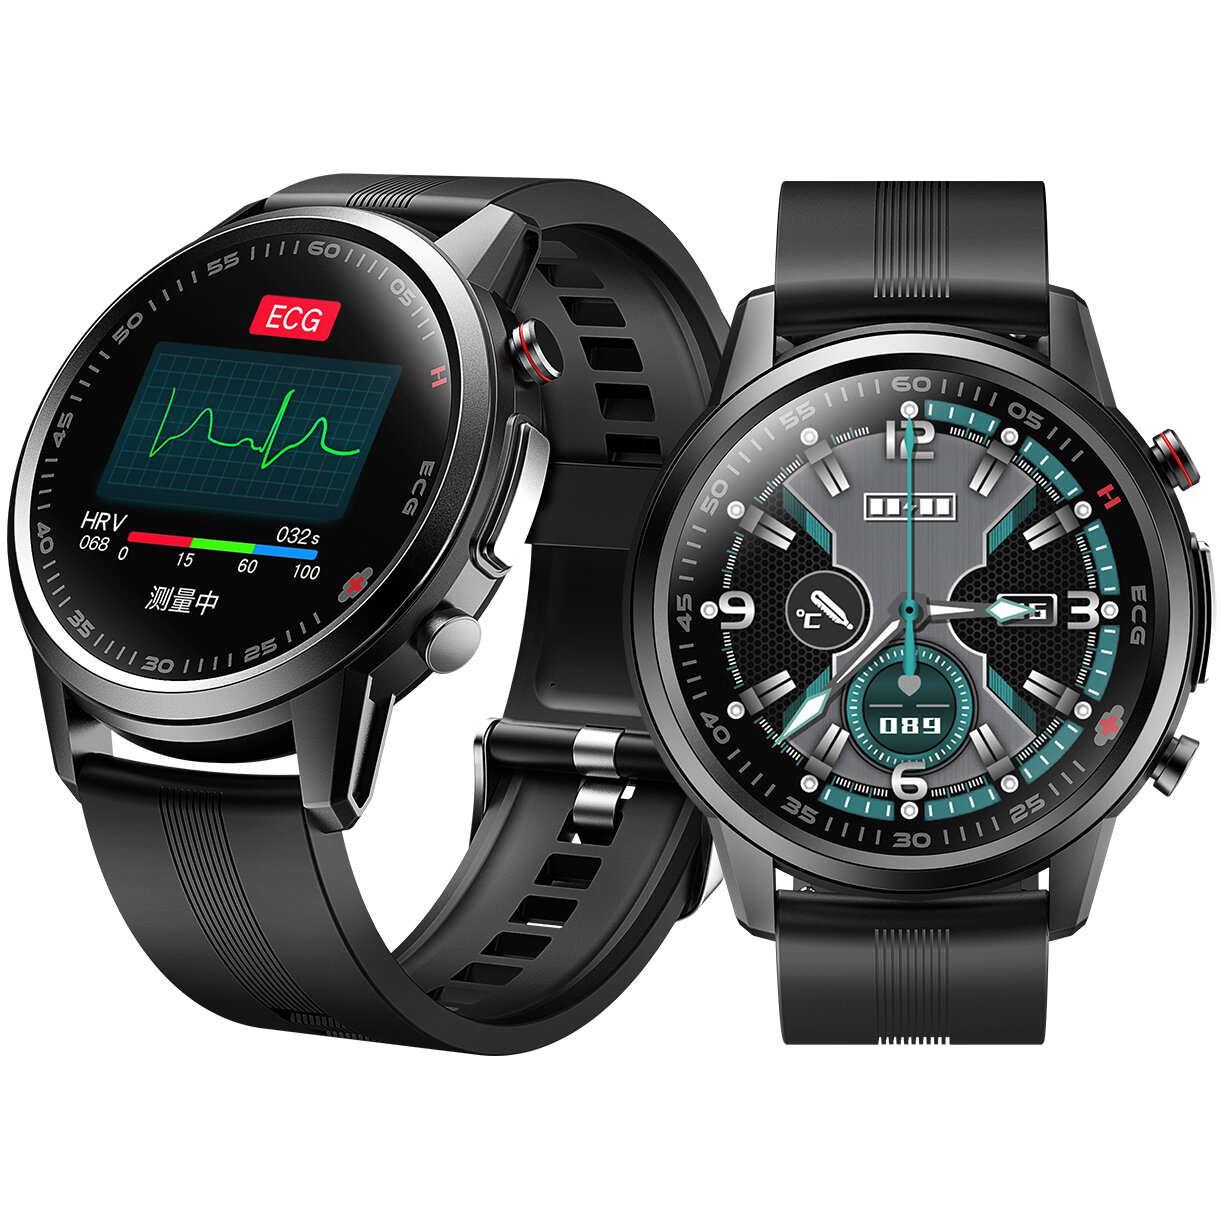 [Laser Therapy] Bakeey F800 1.3 inch Touch Screen ECG Measurement Body Temperature Heart Rate Blood Pressure Oxygen Monitor IP67 Waterproof BT5.0 Smart Watch